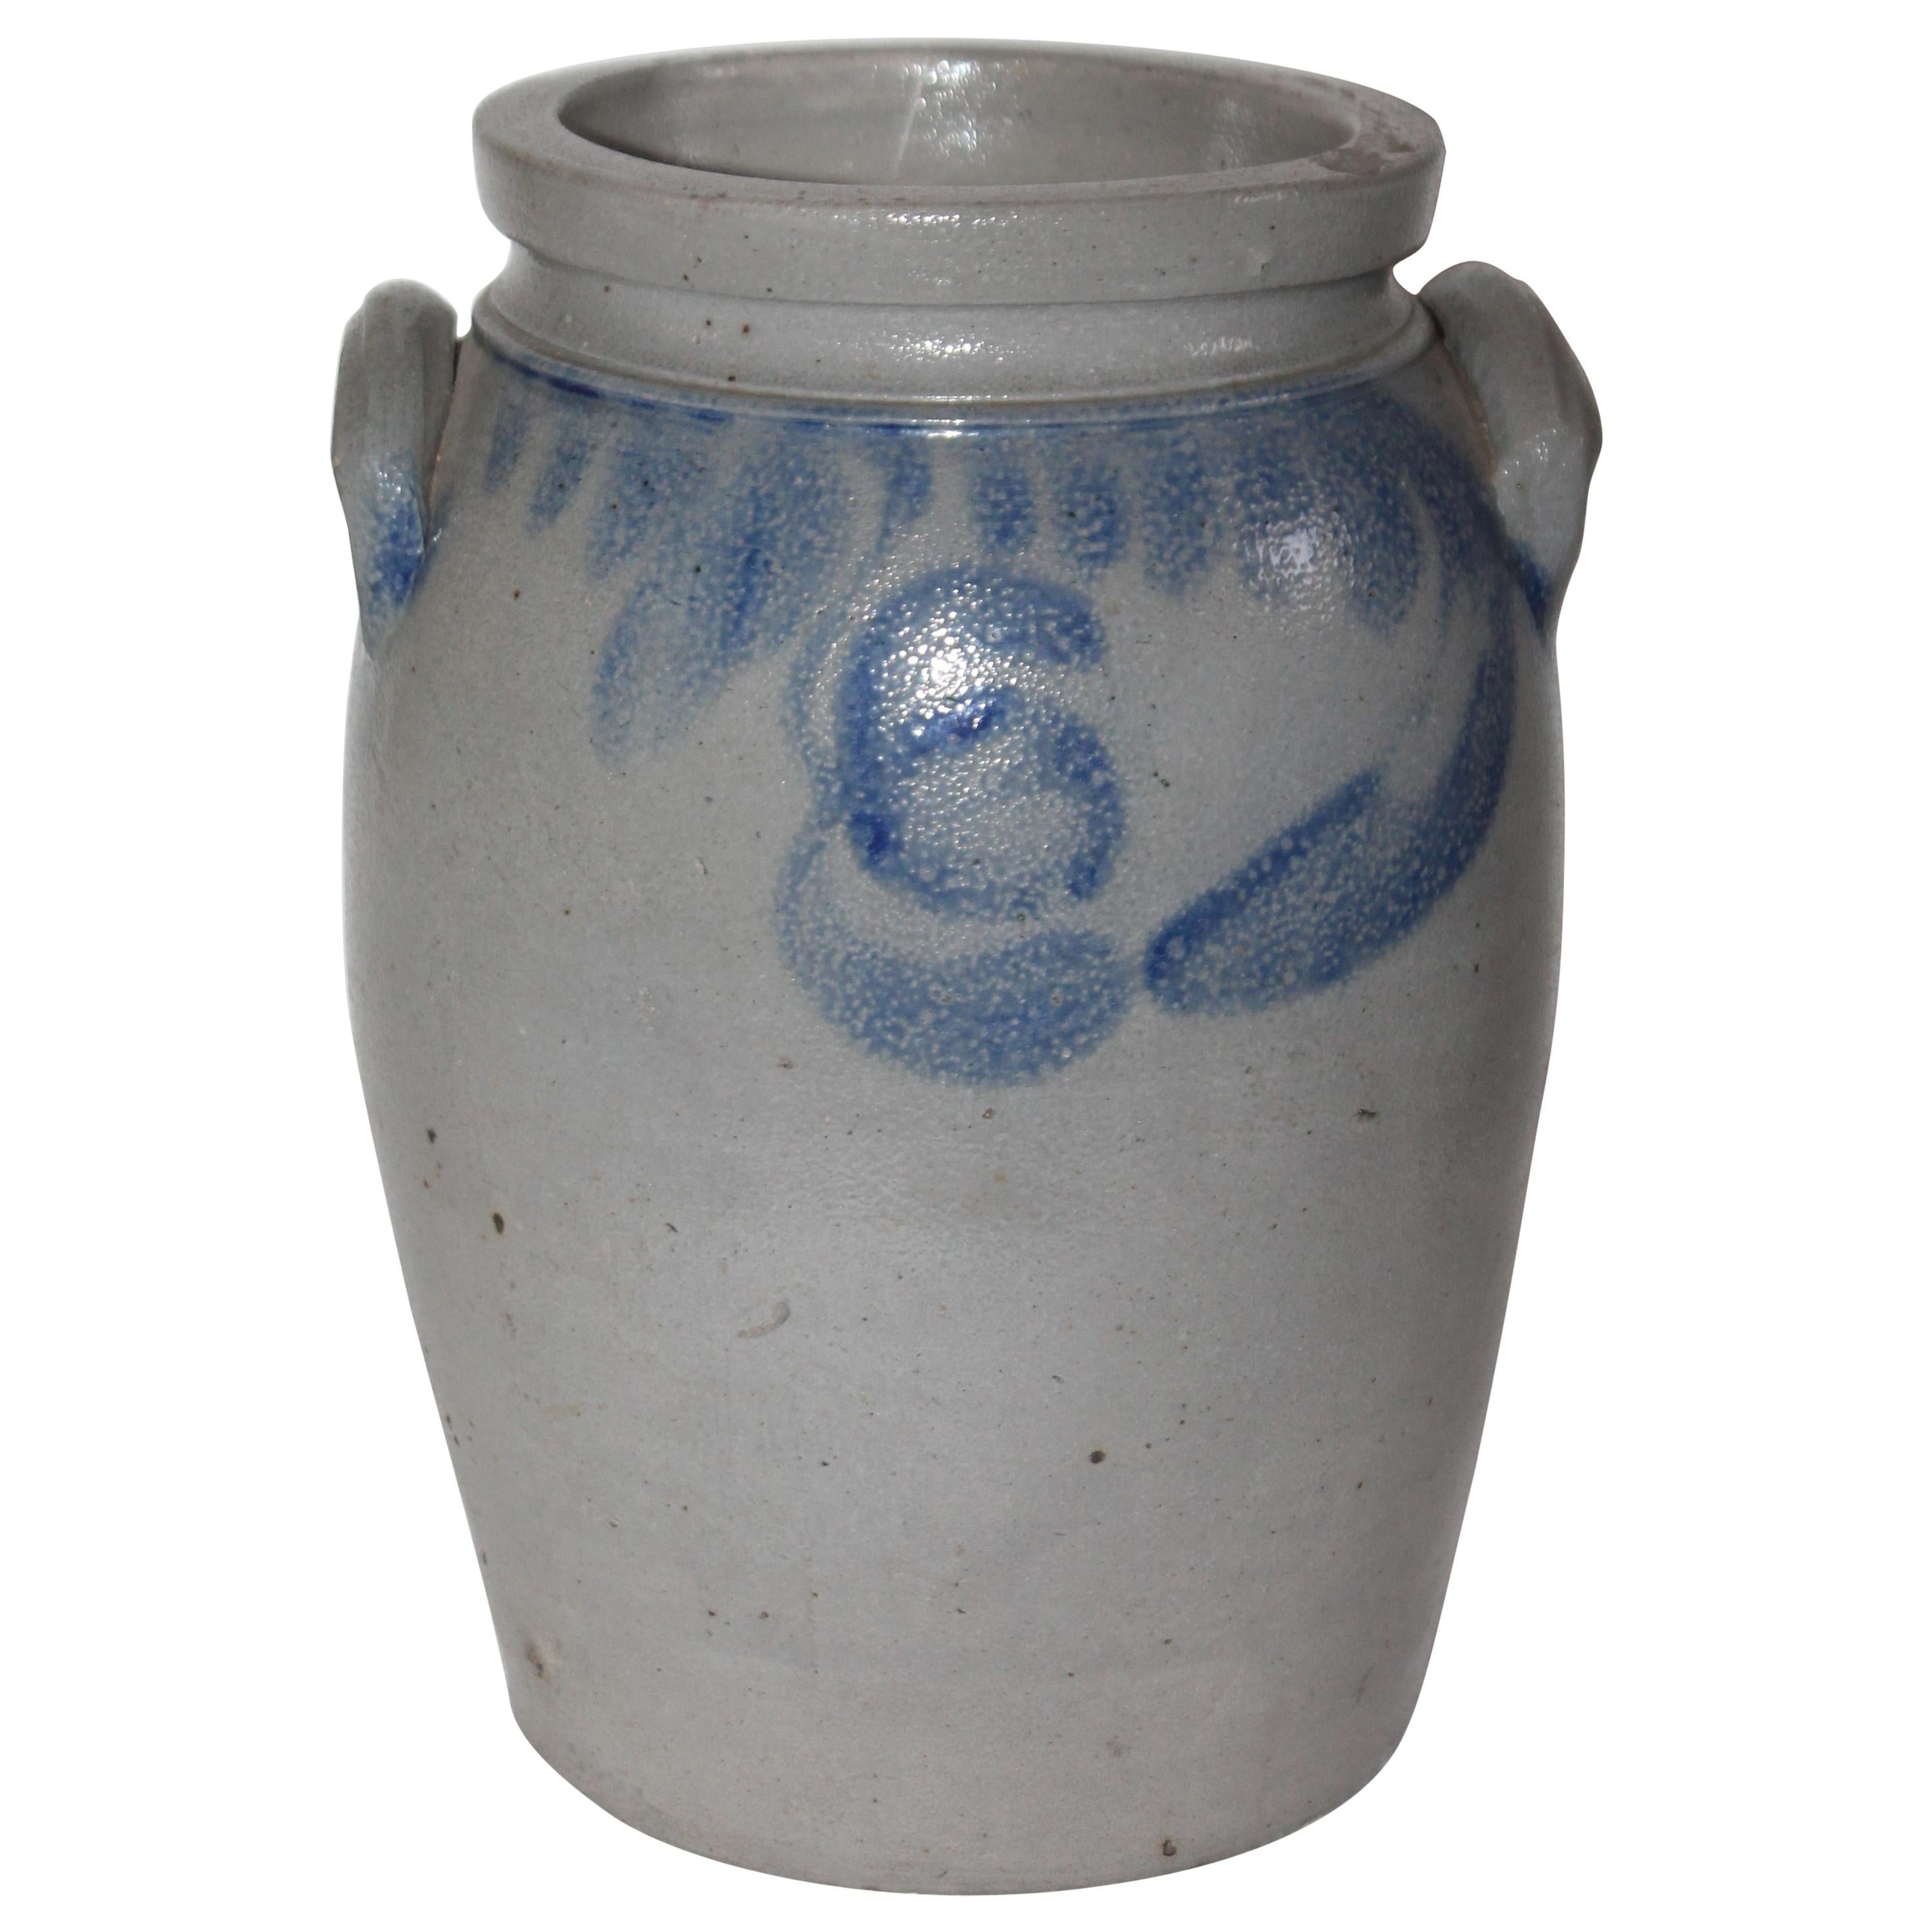 19th Century Decorated Crock From Pennsylvania